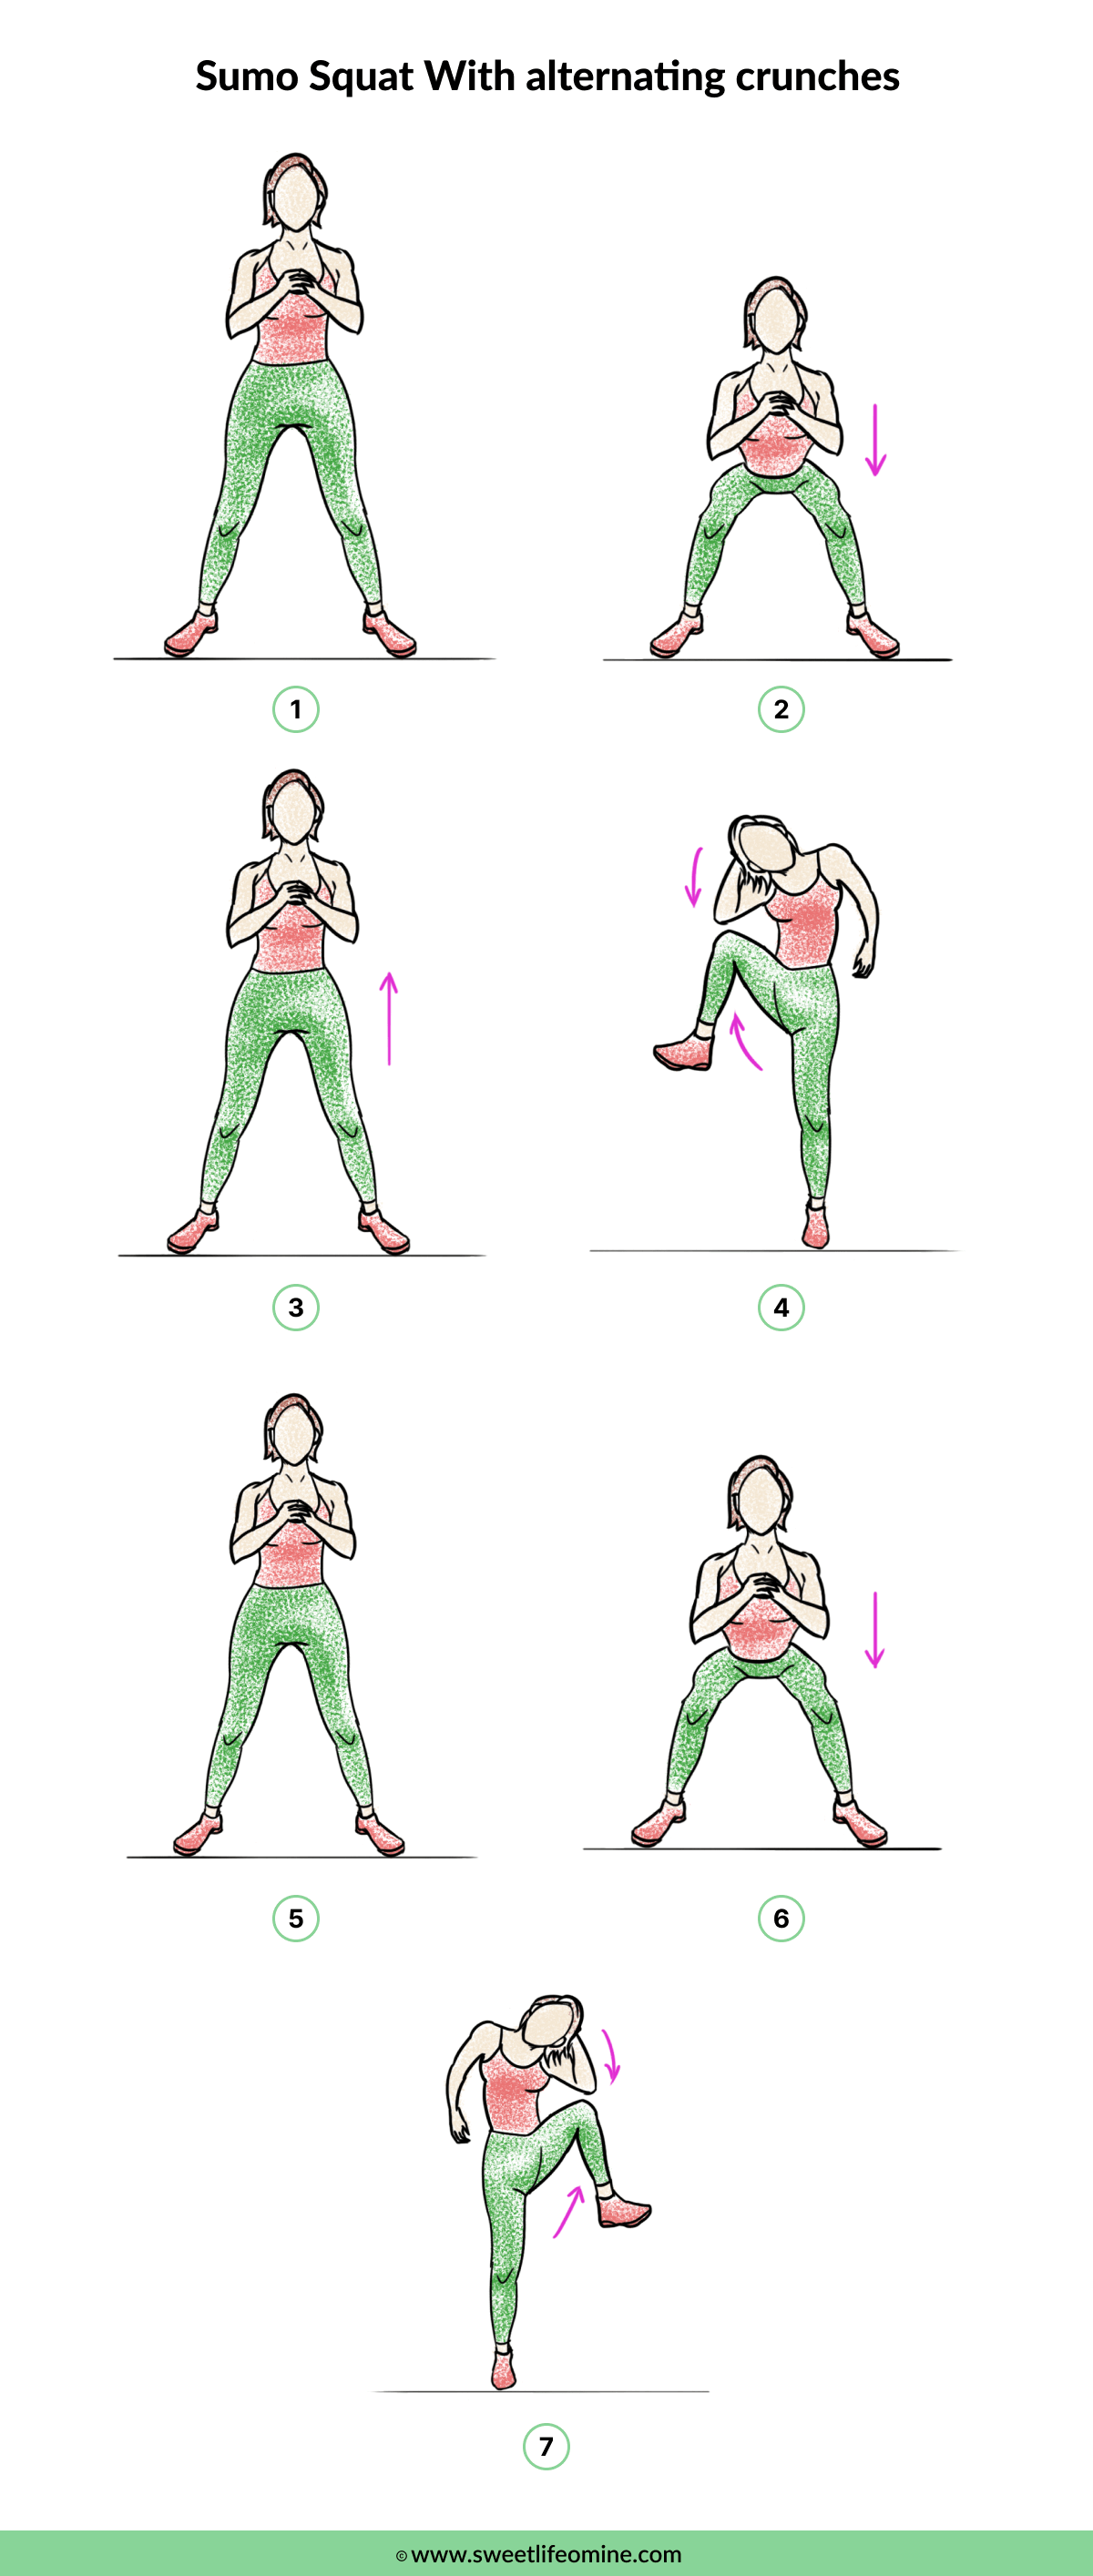 Sumo Squat With alternating crunches - Muffin Top Exercise